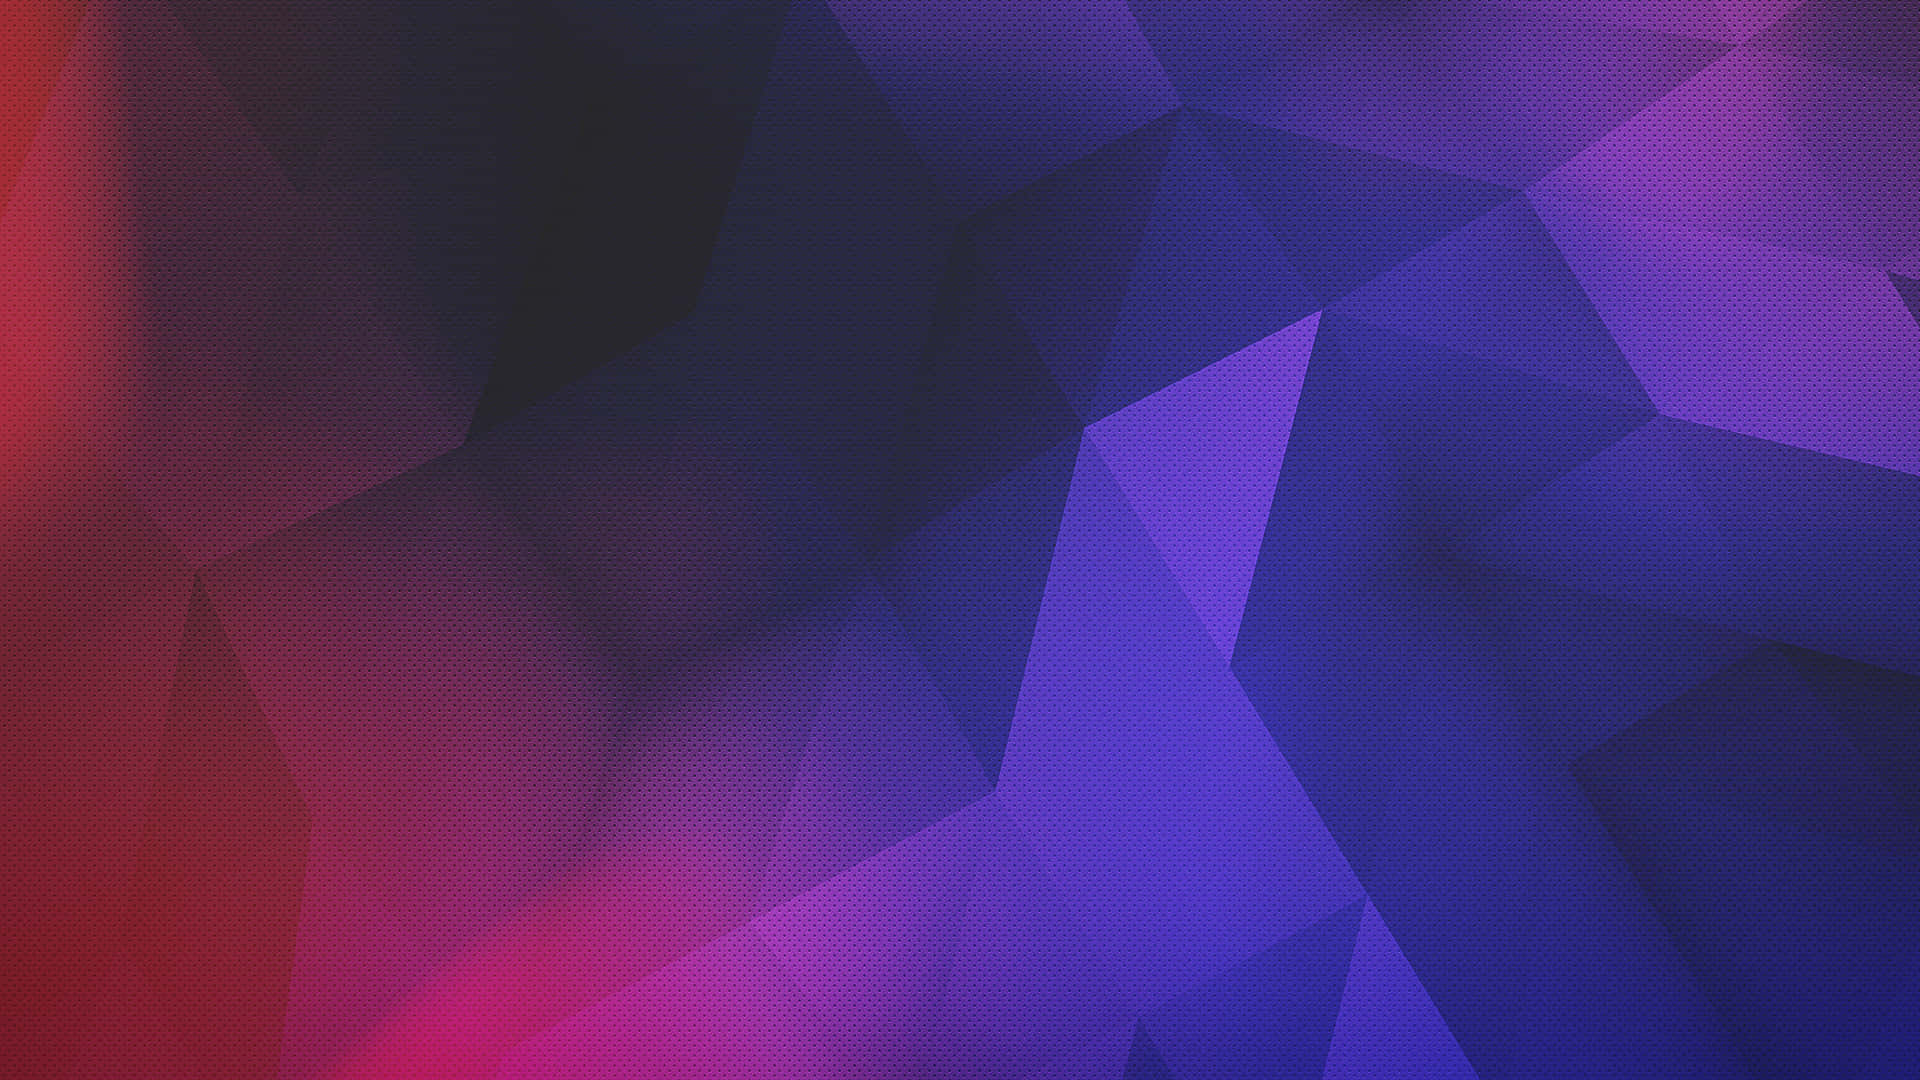 A stunning purple and blue ombre background Wallpaper